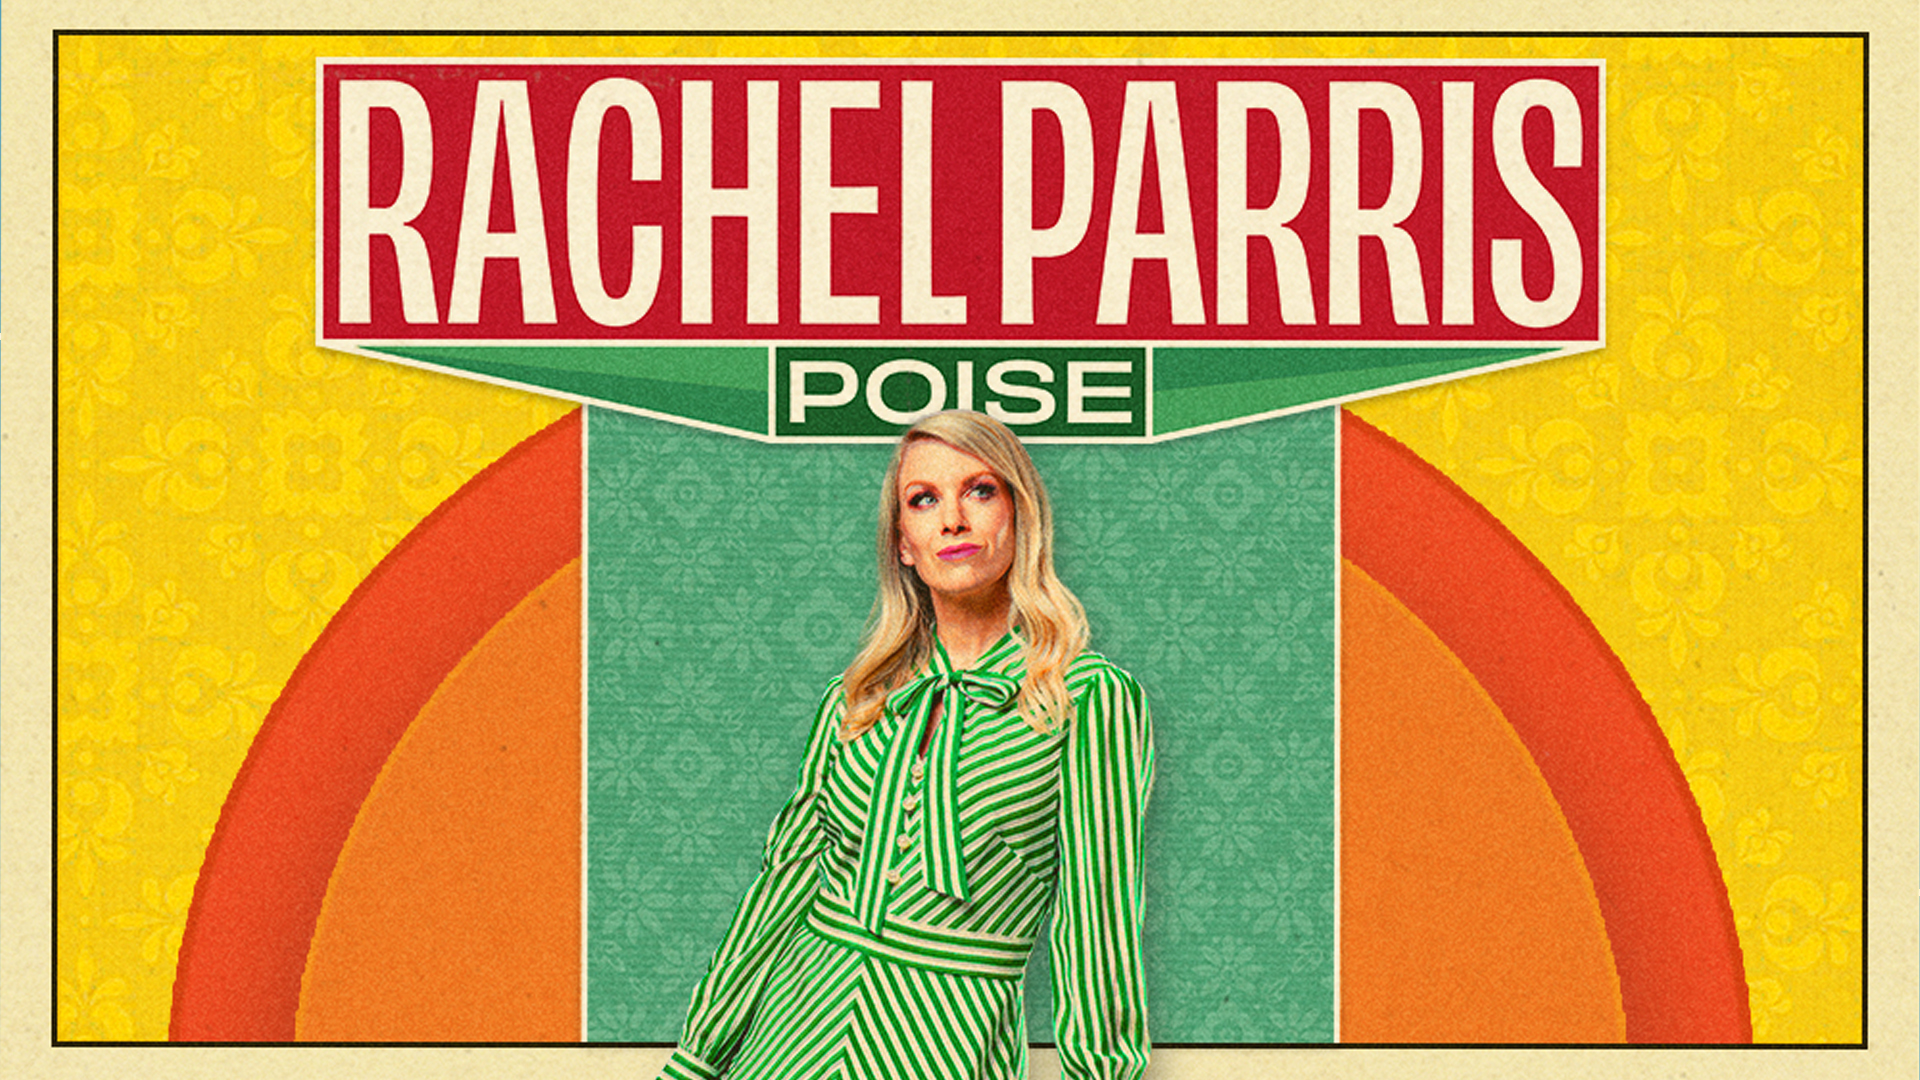 Show and Tell in association with Sophie Chapman Talent presents Rachel Parris: Poise